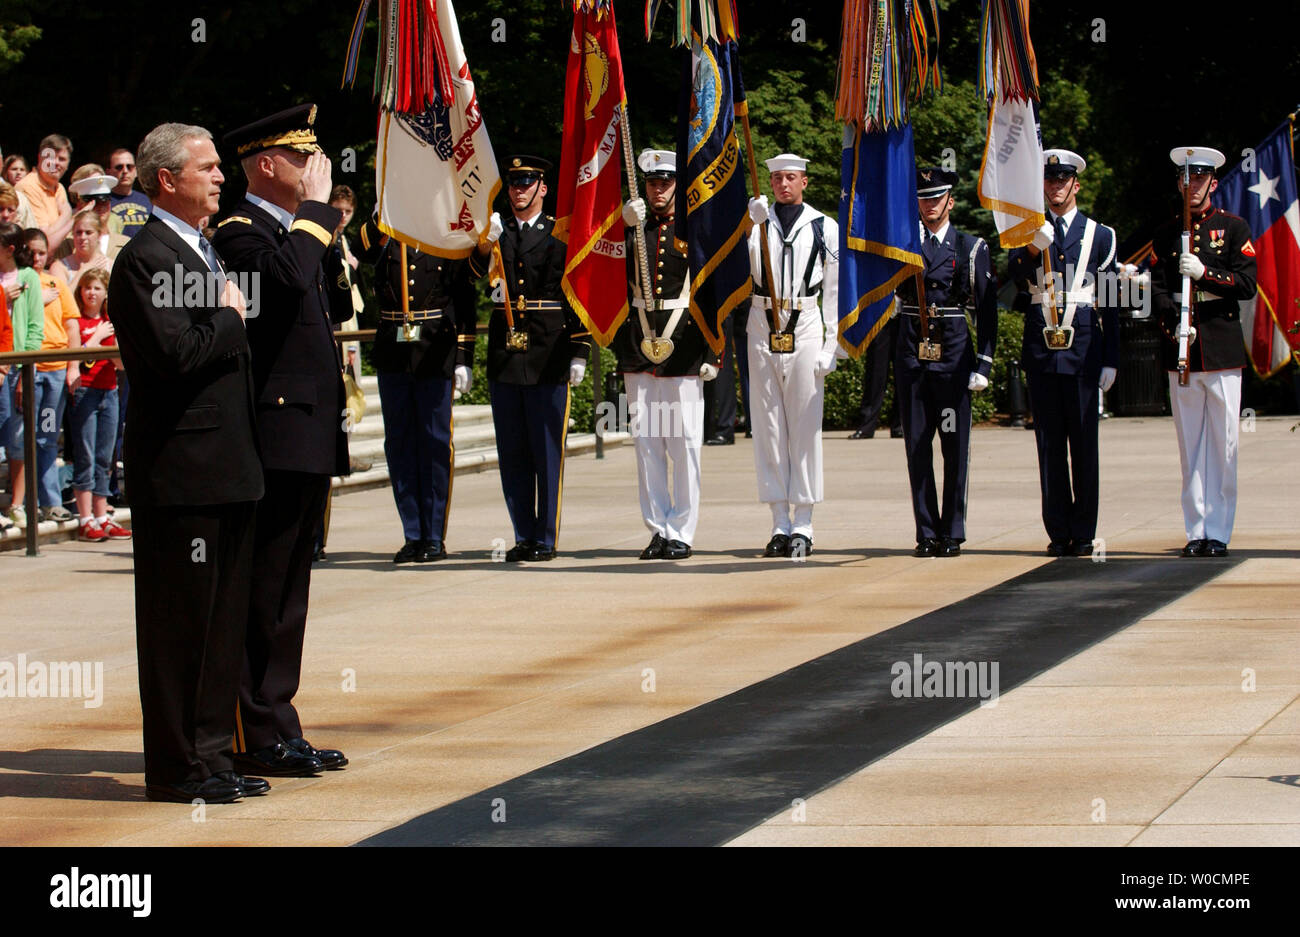 President George W. Bush covers his heart while participating in a Memorial Day ceremony at the Tomb of the Unknowns, on May 30, 2005 in Arlington National Cemetery. Maj. Gen. Galen B. Jackman stands on the President's right. This year, members of the armed services paid special tribute to those who have died in Iraq and Afghanistan.  (UPI Photo/Michael Kleinfeld) Stock Photo